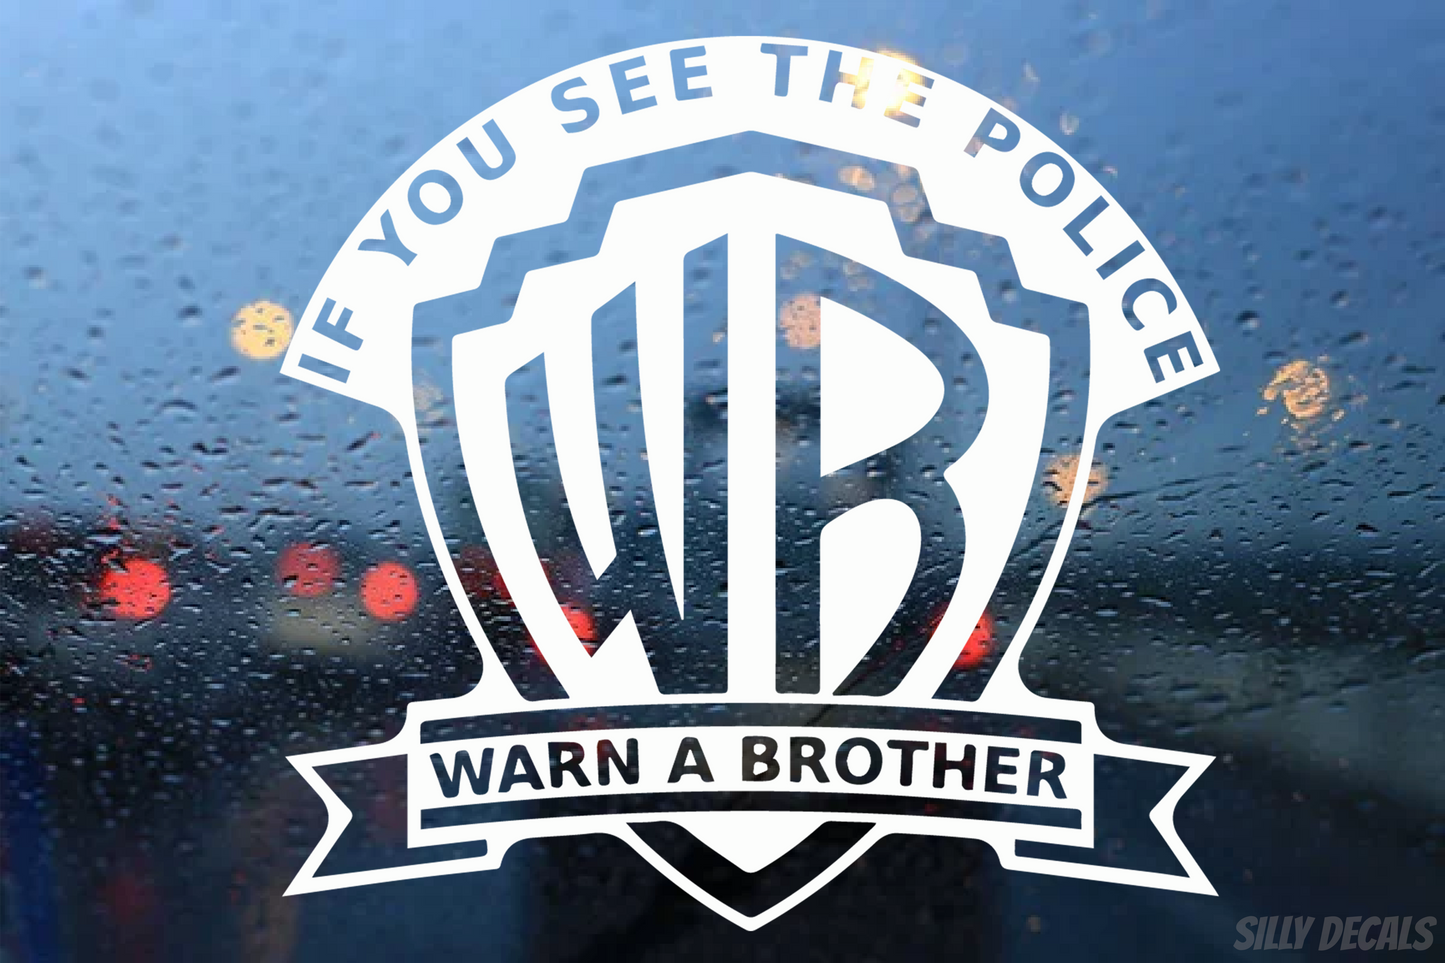 If You See The Police, Warn A Brother; Hilarious Vinyl Decals Suitable For Cars, Windows, Walls, and More!